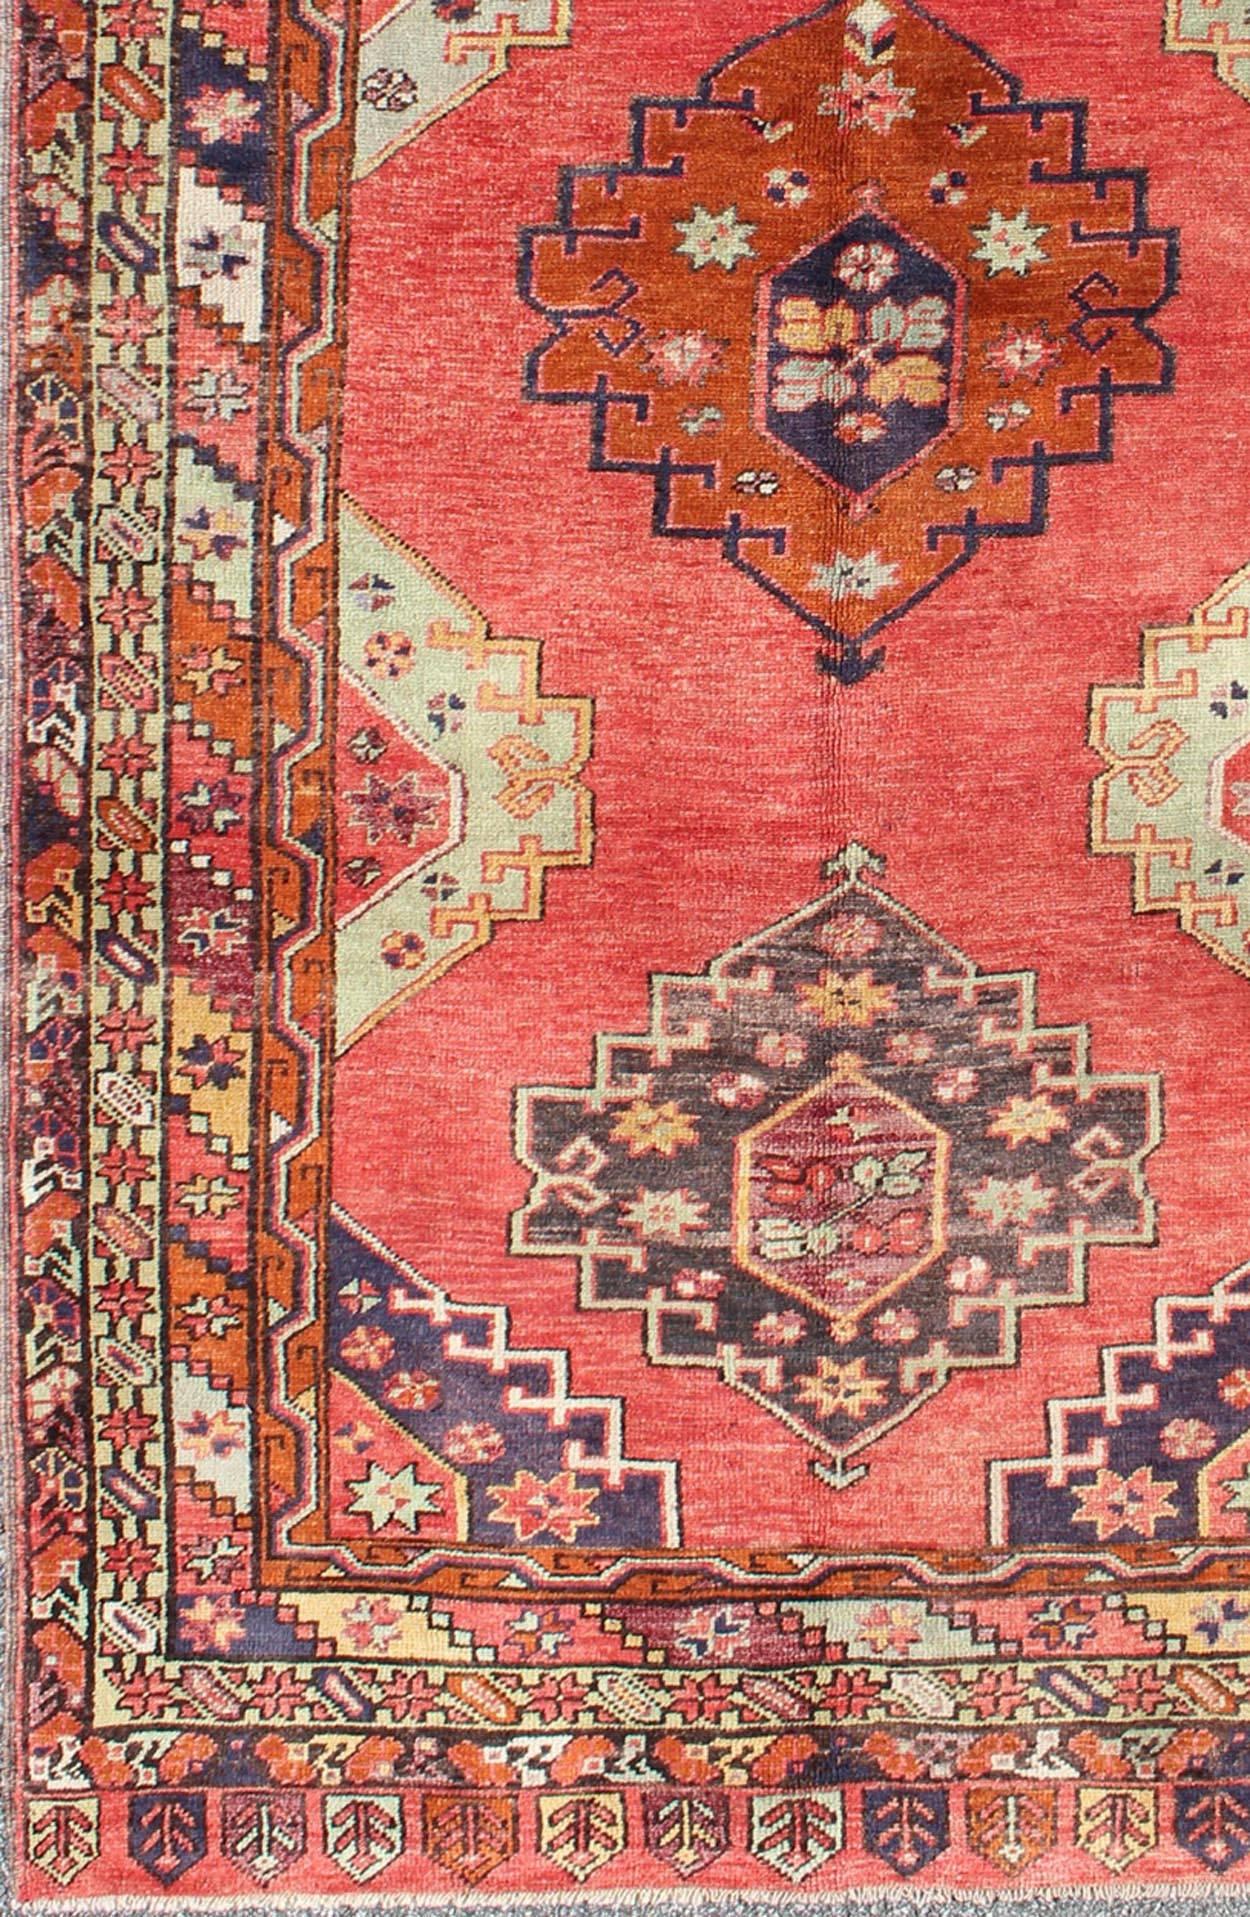 Red field vintage Turkish Oushak rug with vertical geometric medallions, rug en-140057, country of origin / type: Turkey / Oushak, circa 1940

This vintage Turkish Oushak gallery rug (circa mid-20th century) features a unique blend of colors and